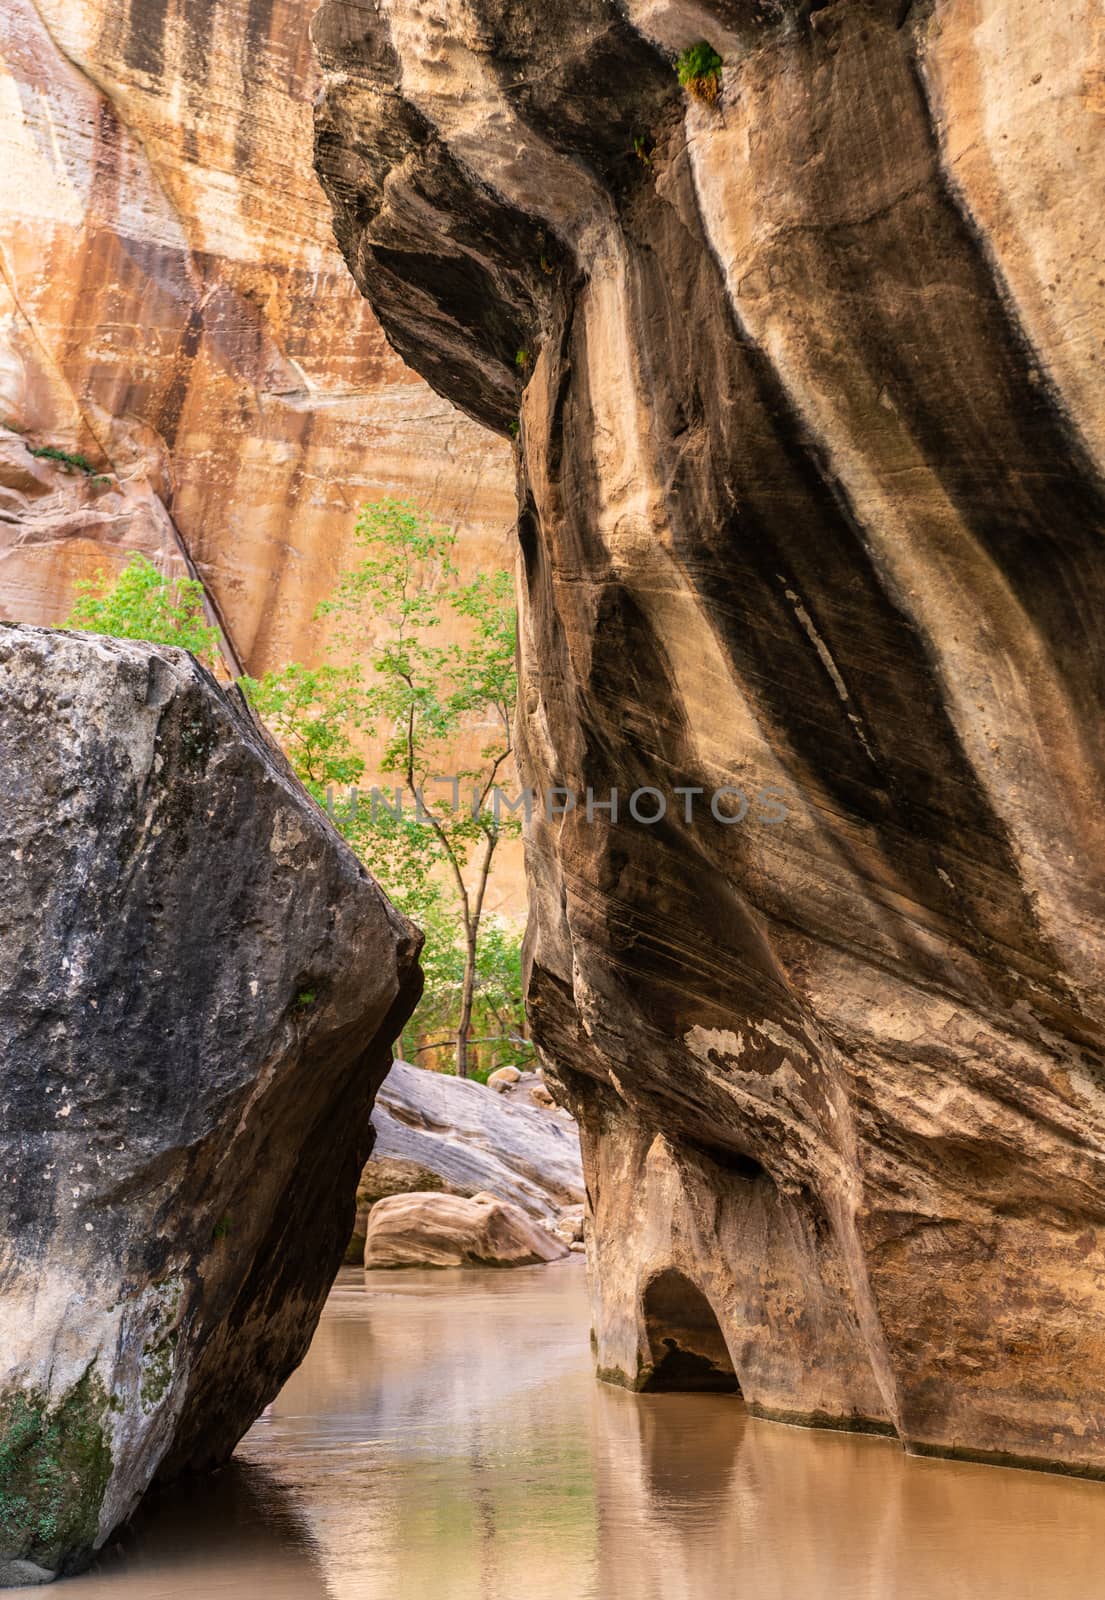 The Narrows in Zion National Park, Utah by Njean